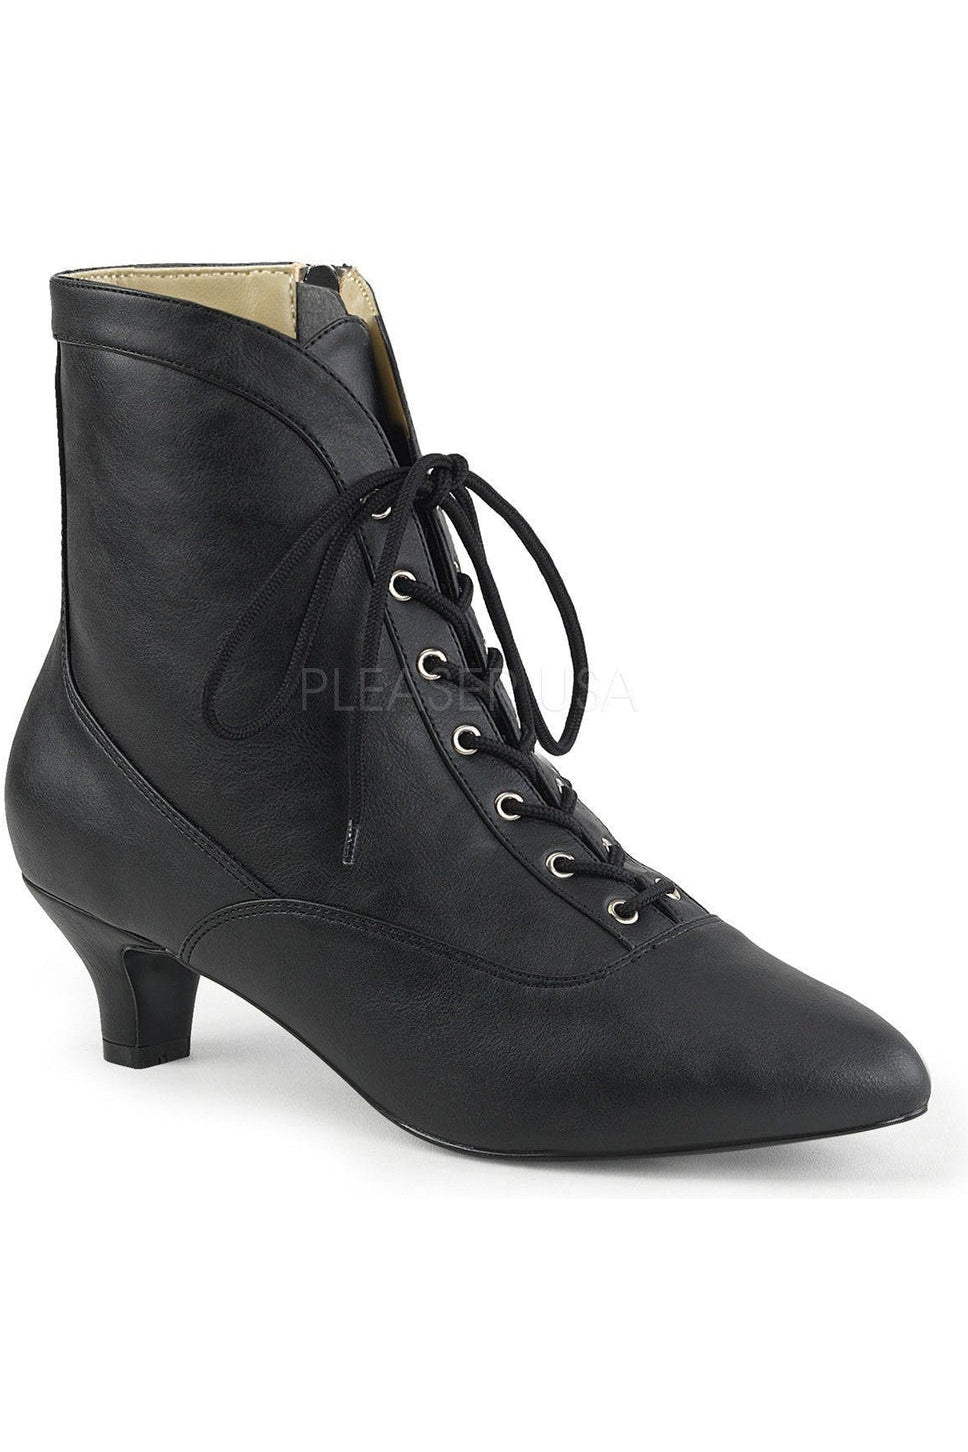 FAB-1005 Ankle Boot | Black Faux Leather-Pleaser Pink Label-Black-Ankle Boots-SEXYSHOES.COM